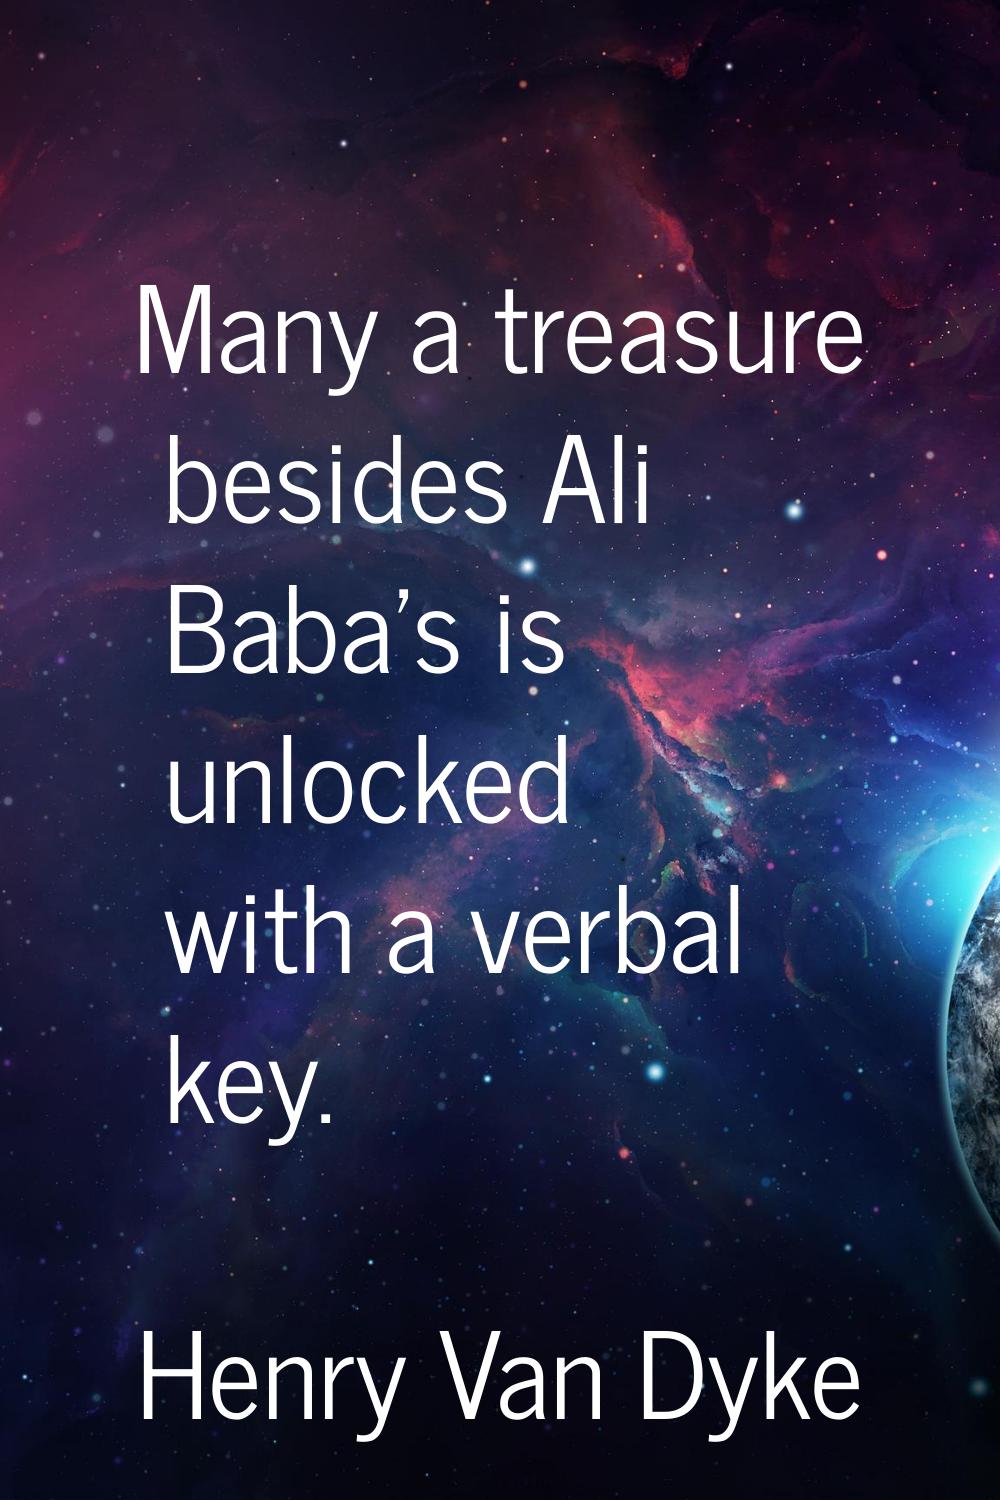 Many a treasure besides Ali Baba's is unlocked with a verbal key.